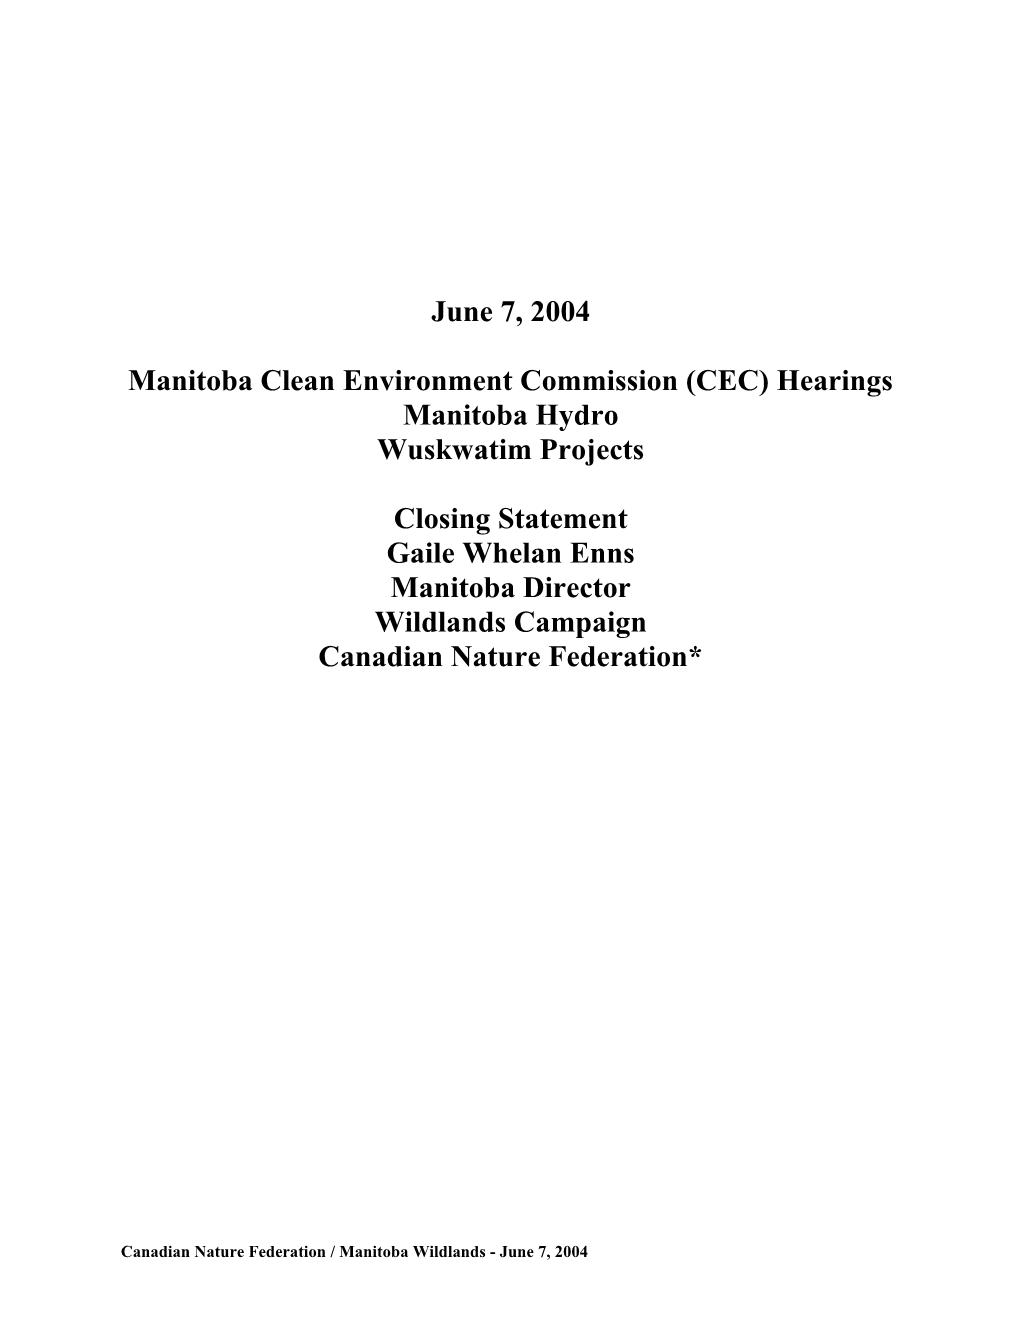 Manitoba Clean Environment Commission (CEC) Hearings